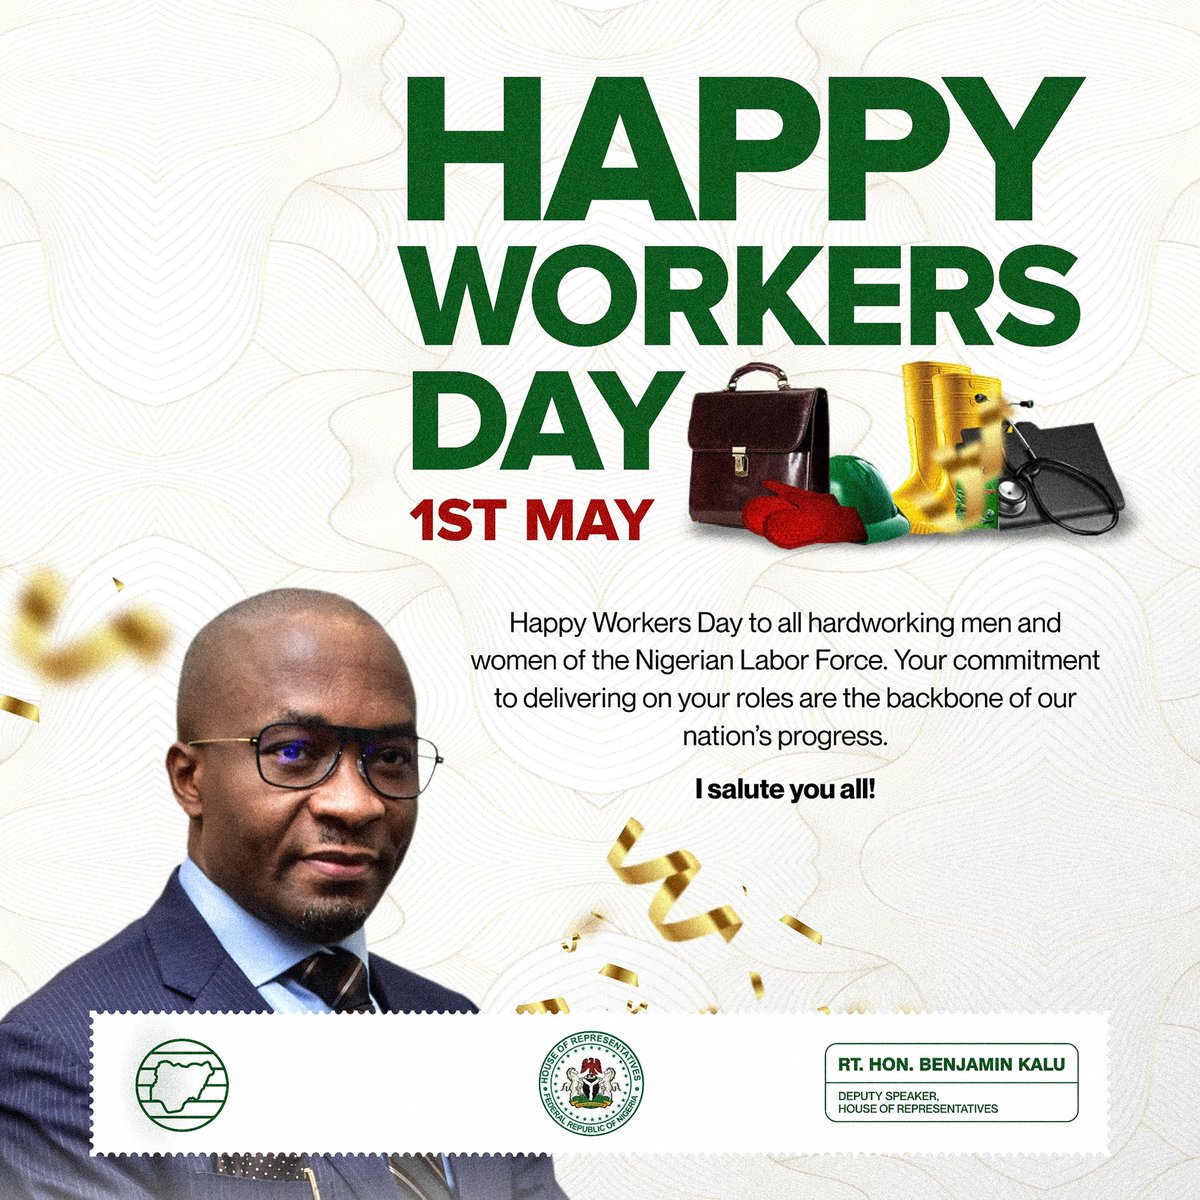 On this special day, I salute the hardworking men and women of the Nigerian labour force. Your invaluable contributions and dedication are the backbone of our nation’s progress. As we celebrate this International Workers’ Day, our commitment stands firm in prioritizing your